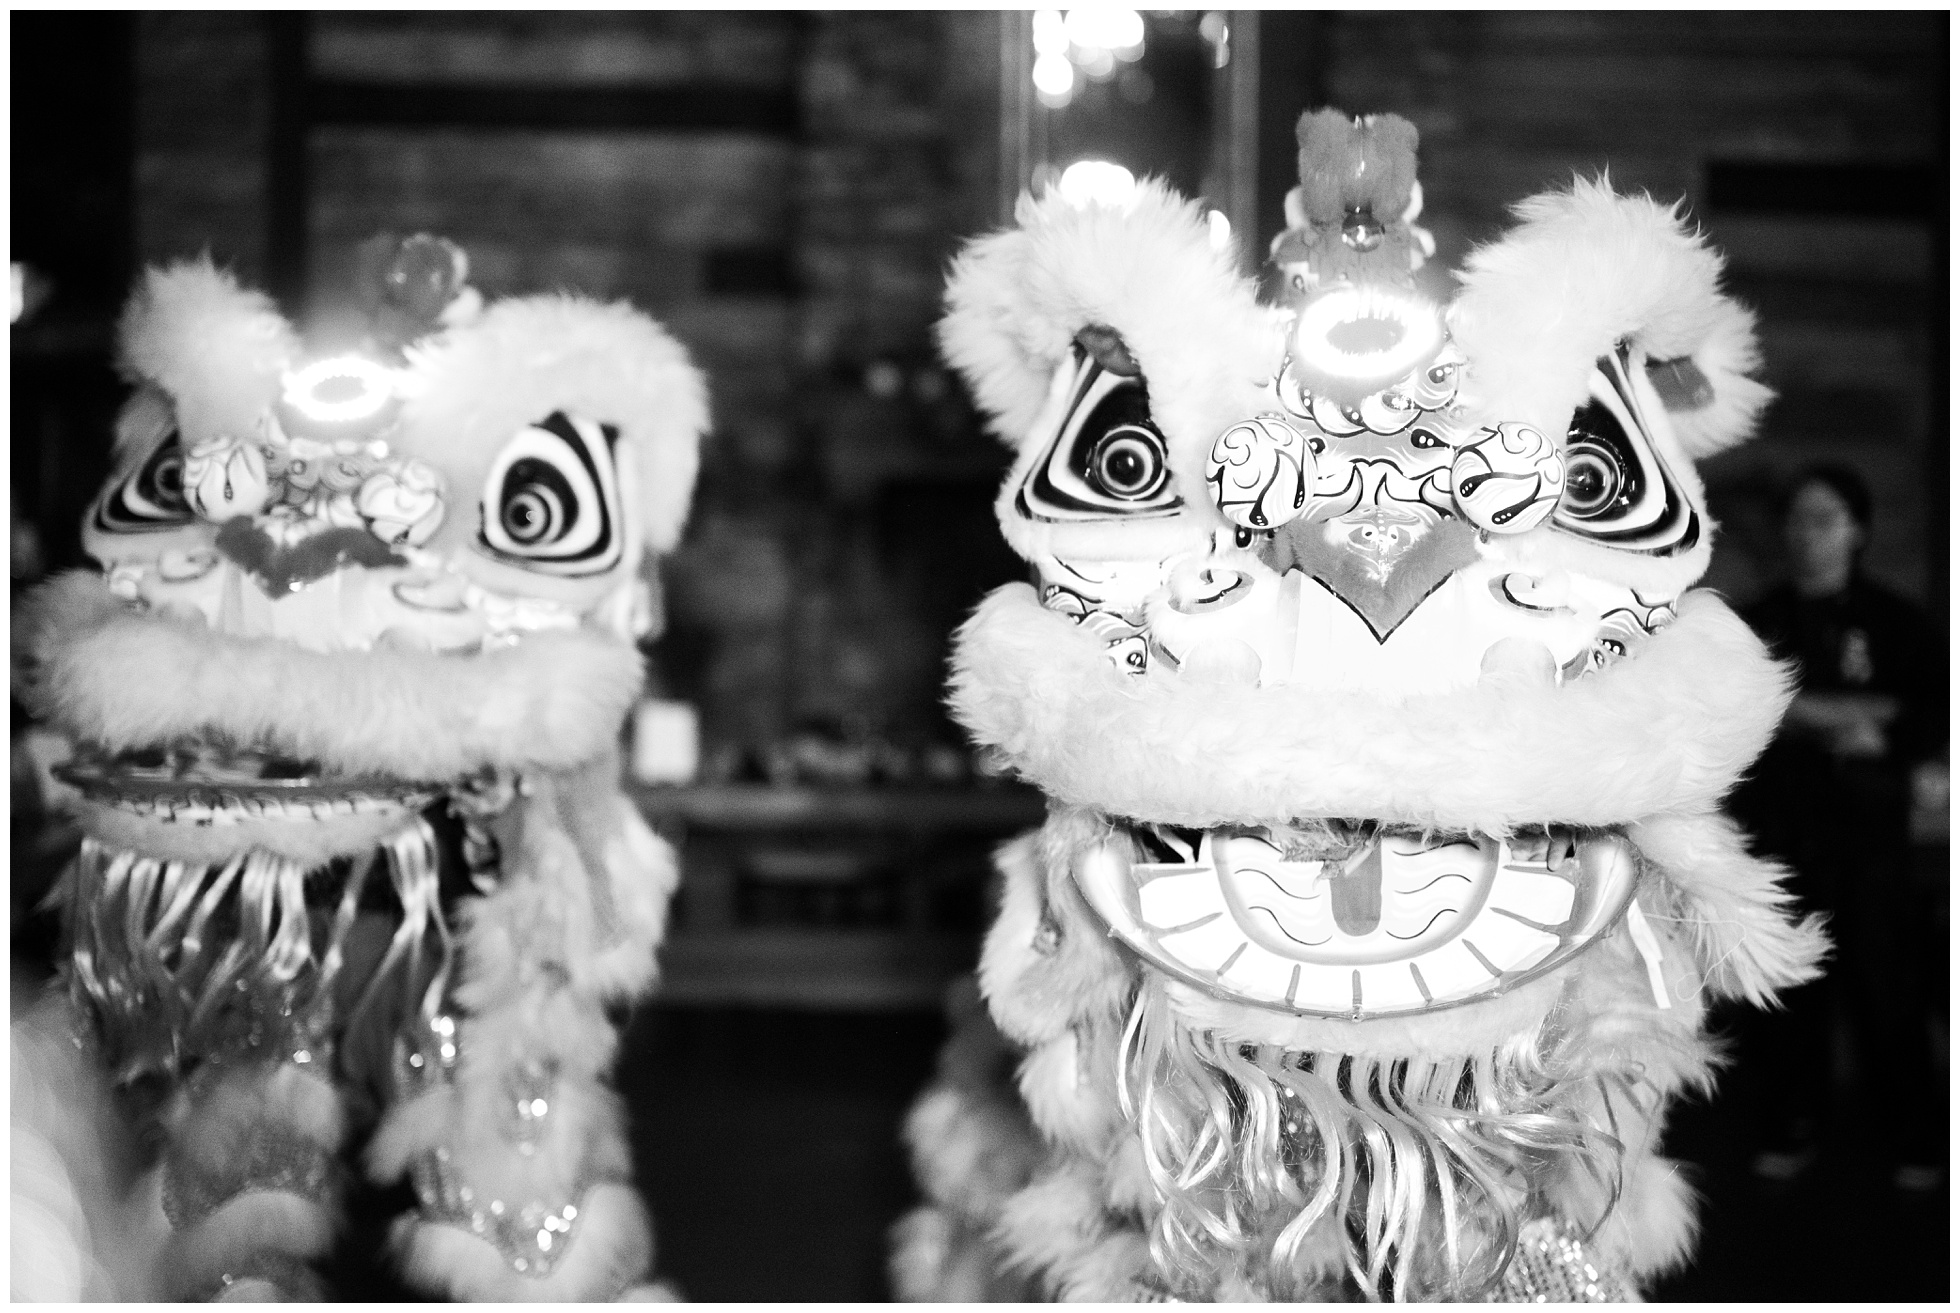 Chinese Lion Dance costumes.